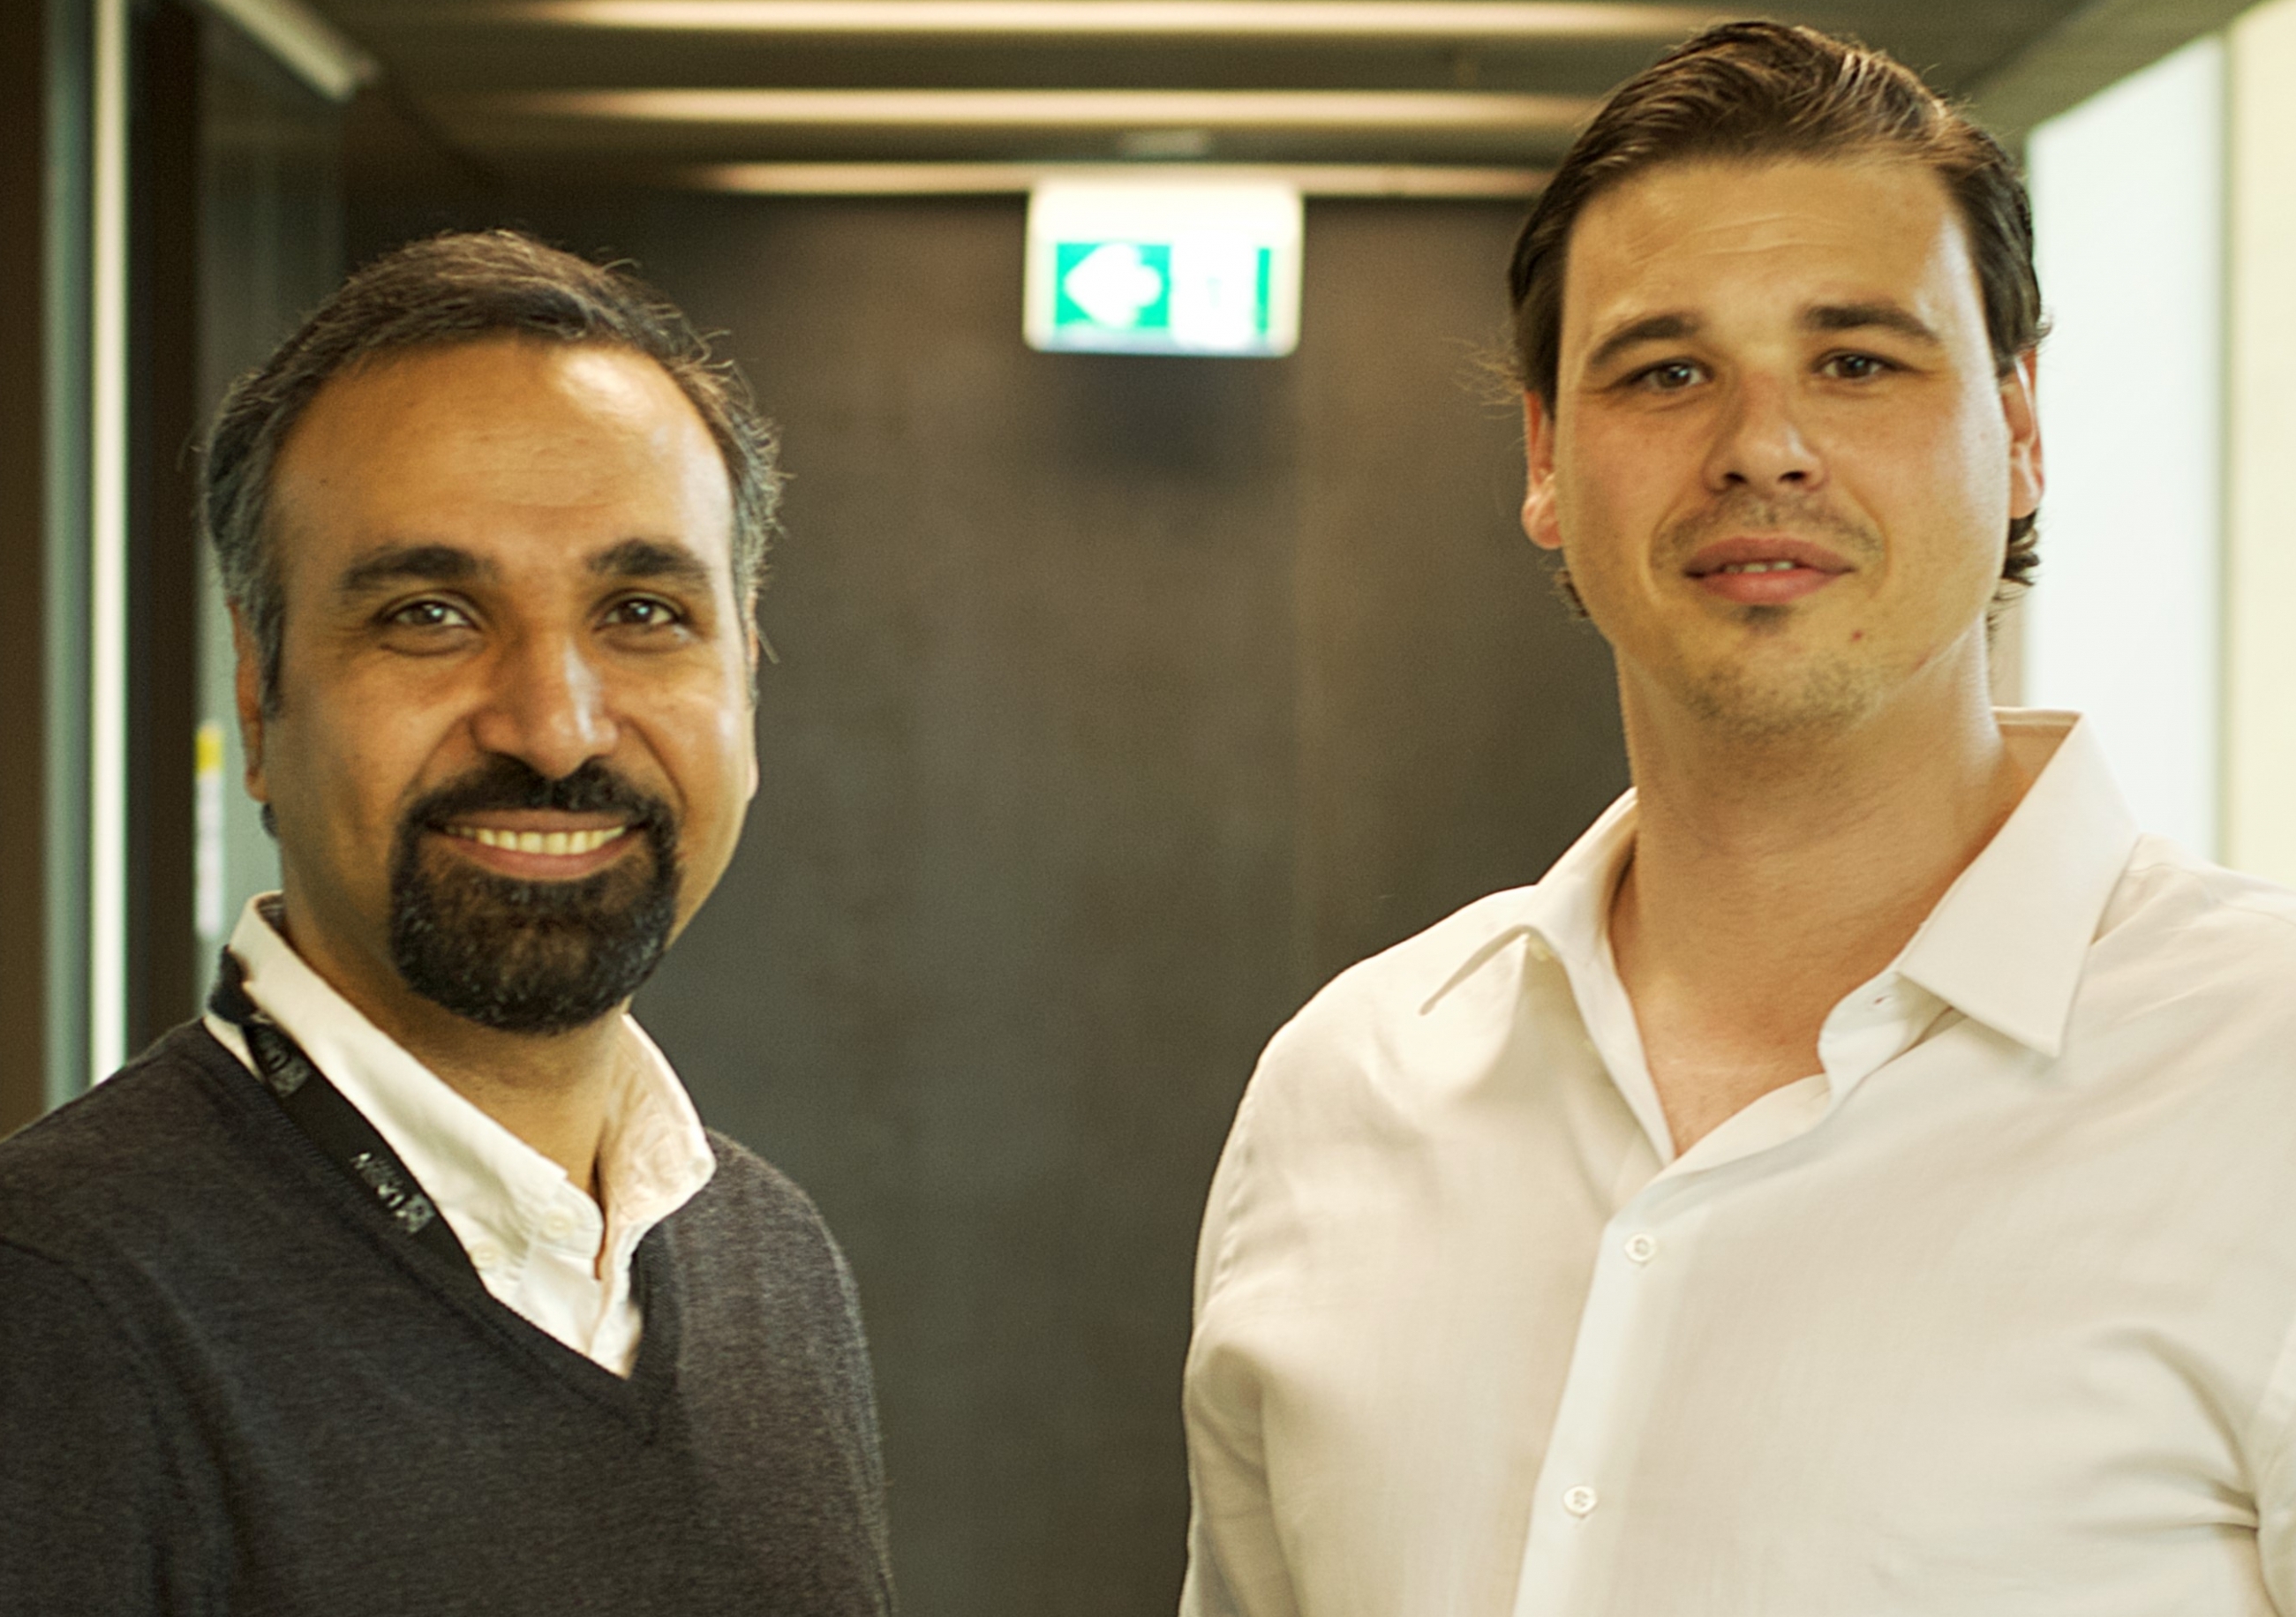 Dr Hassan Habibi with Mr Adam de Jong, who is CEO of the UNSW spin-out company, CyAmast.